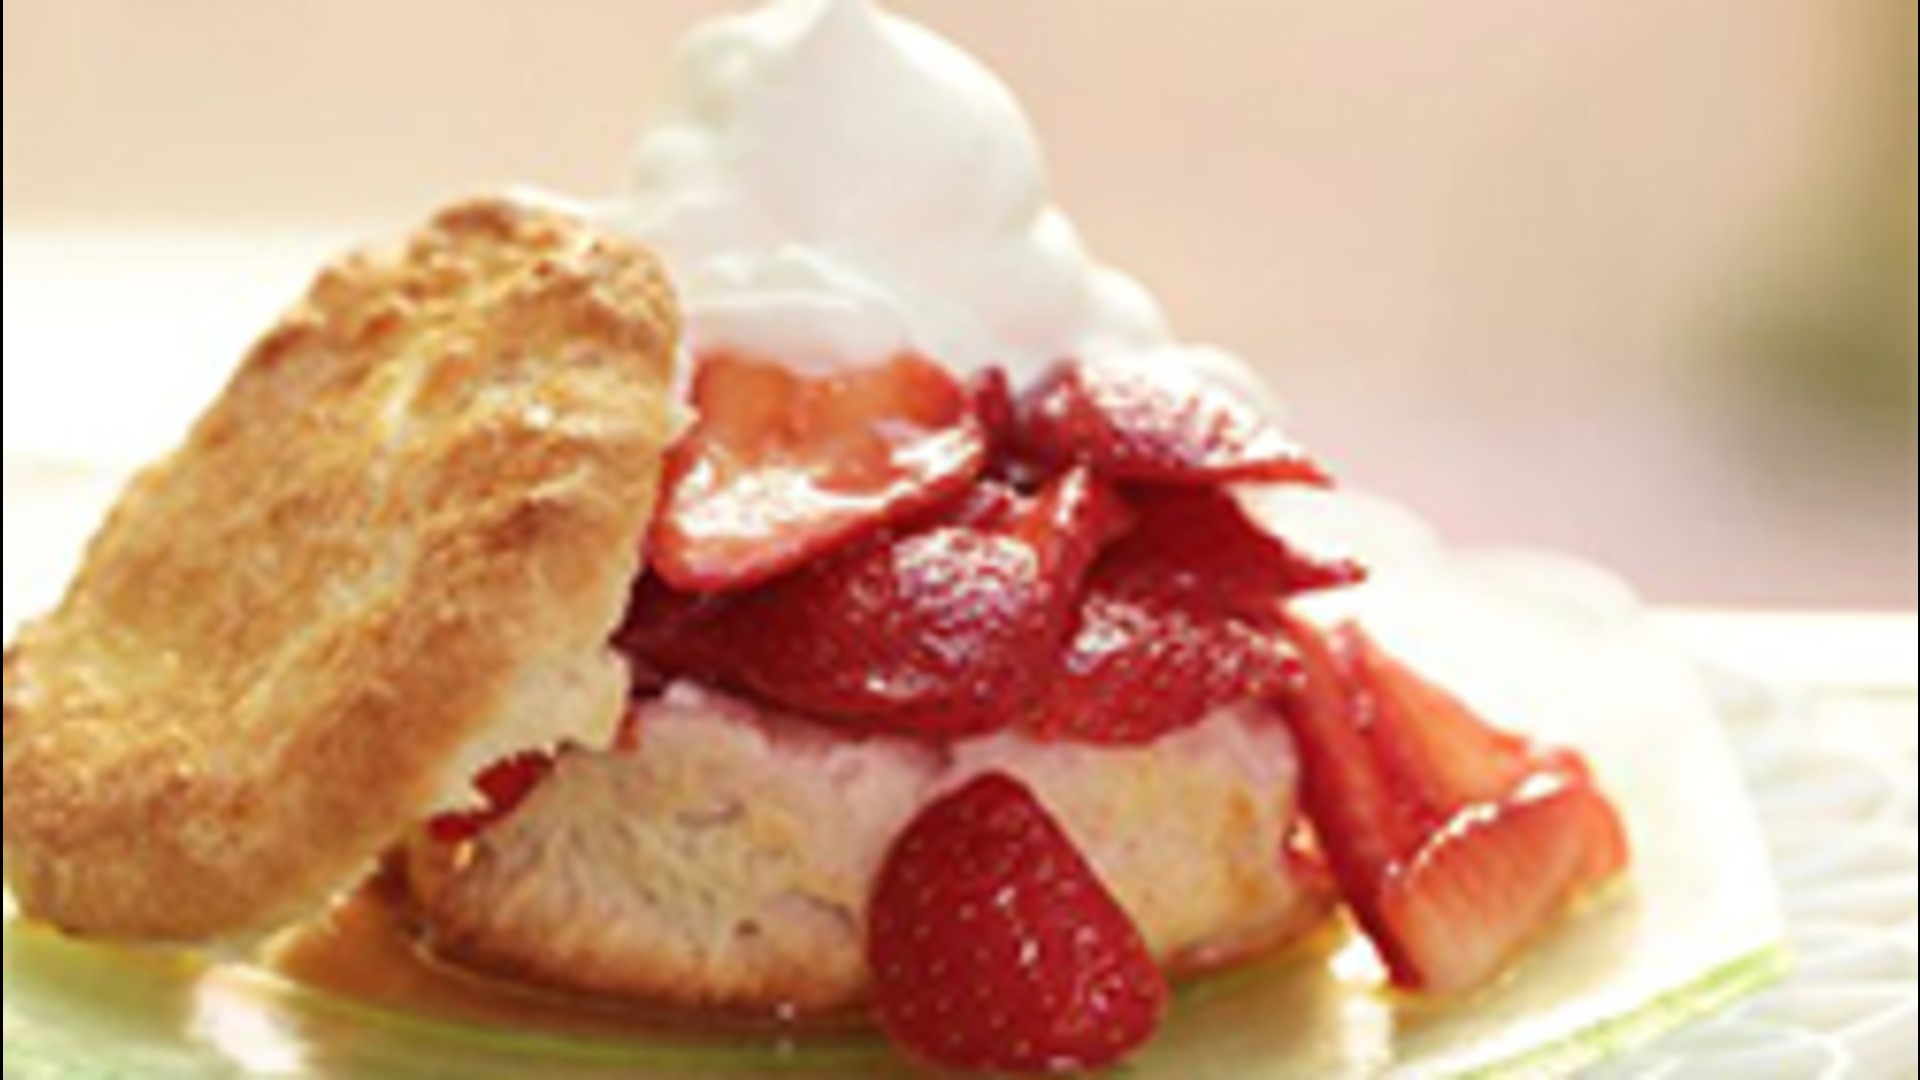 This strawberry shortcake with homemade biscuits recipe is out of this world! The combination of sweet, tangy strawberries...smooth, creamy whipped cream...and light, fluffy biscuits is simply irresistible!